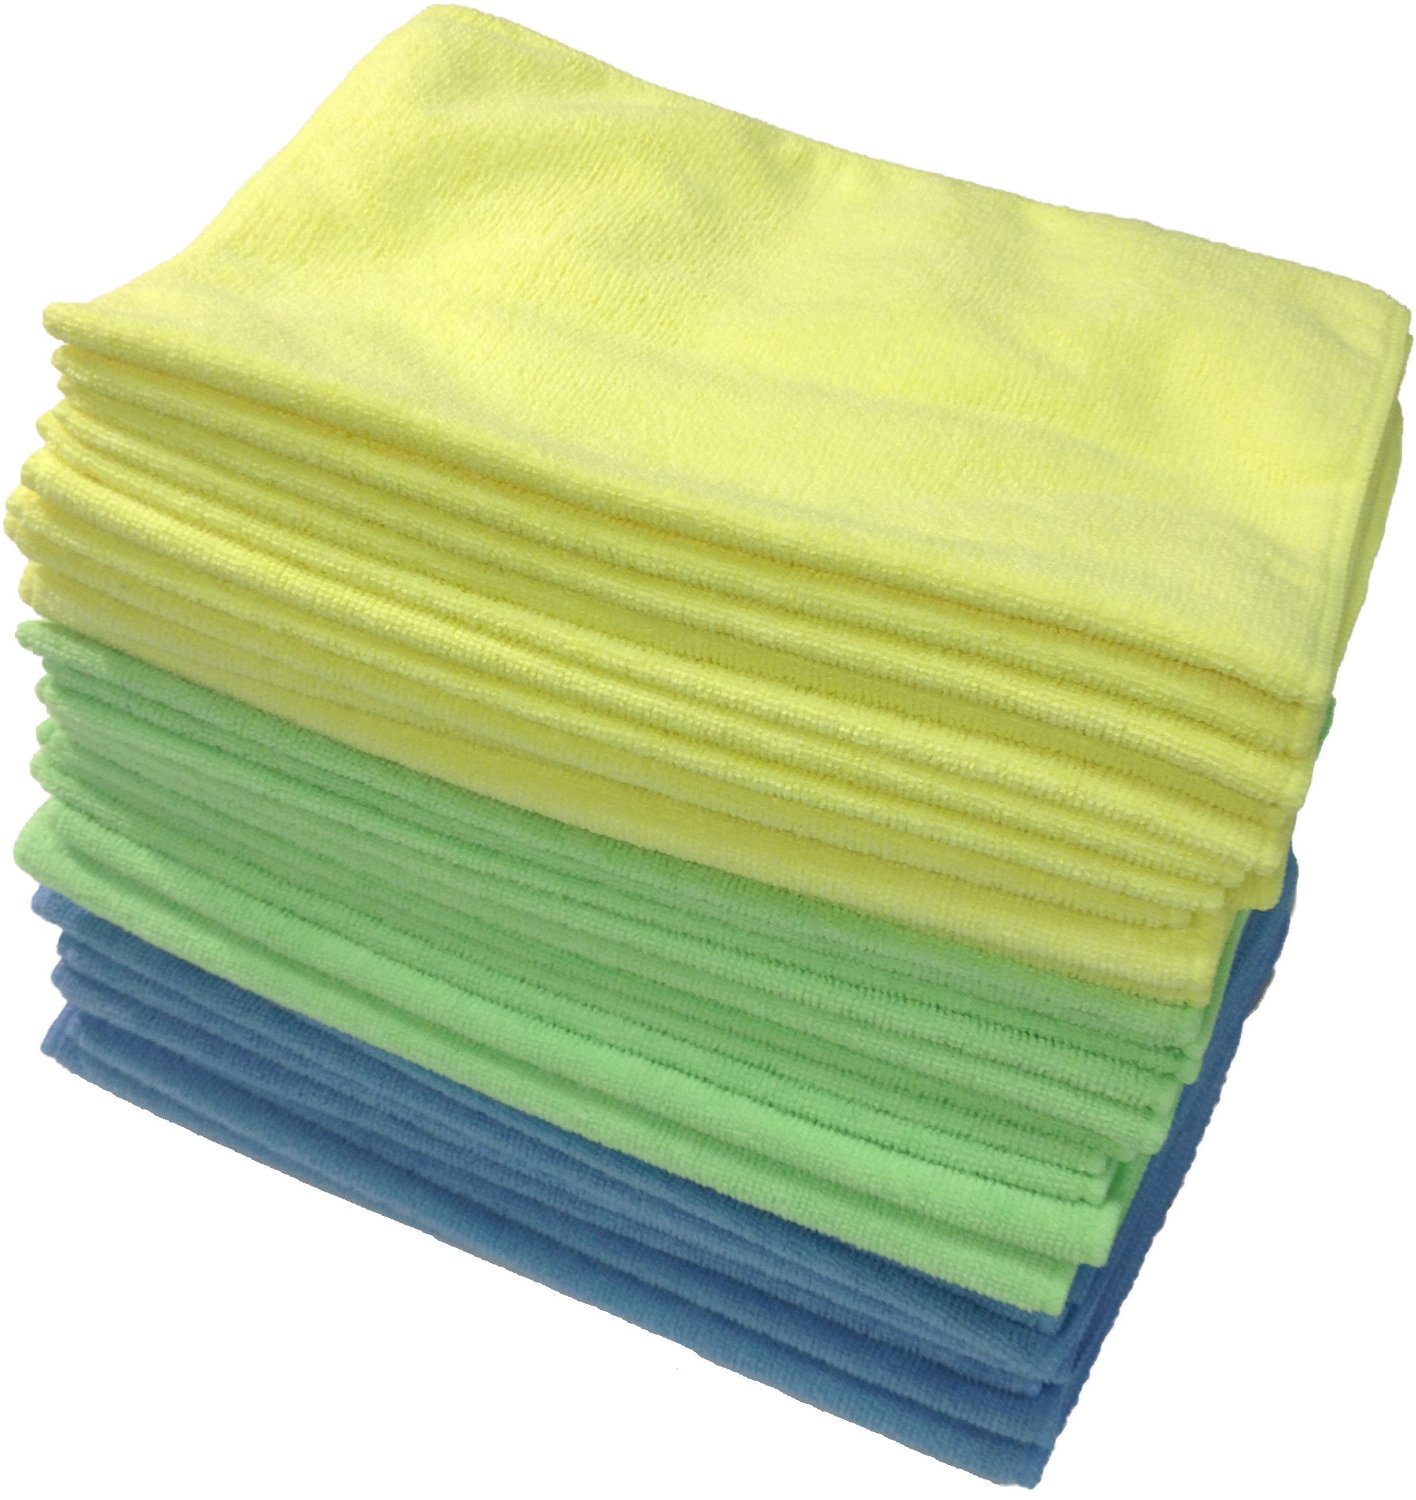 Top 10 Best Microfiber Cleaning Cloths 2017 Top Value Reviews for Astounding Where To Buy Microfiber Cloth you should See